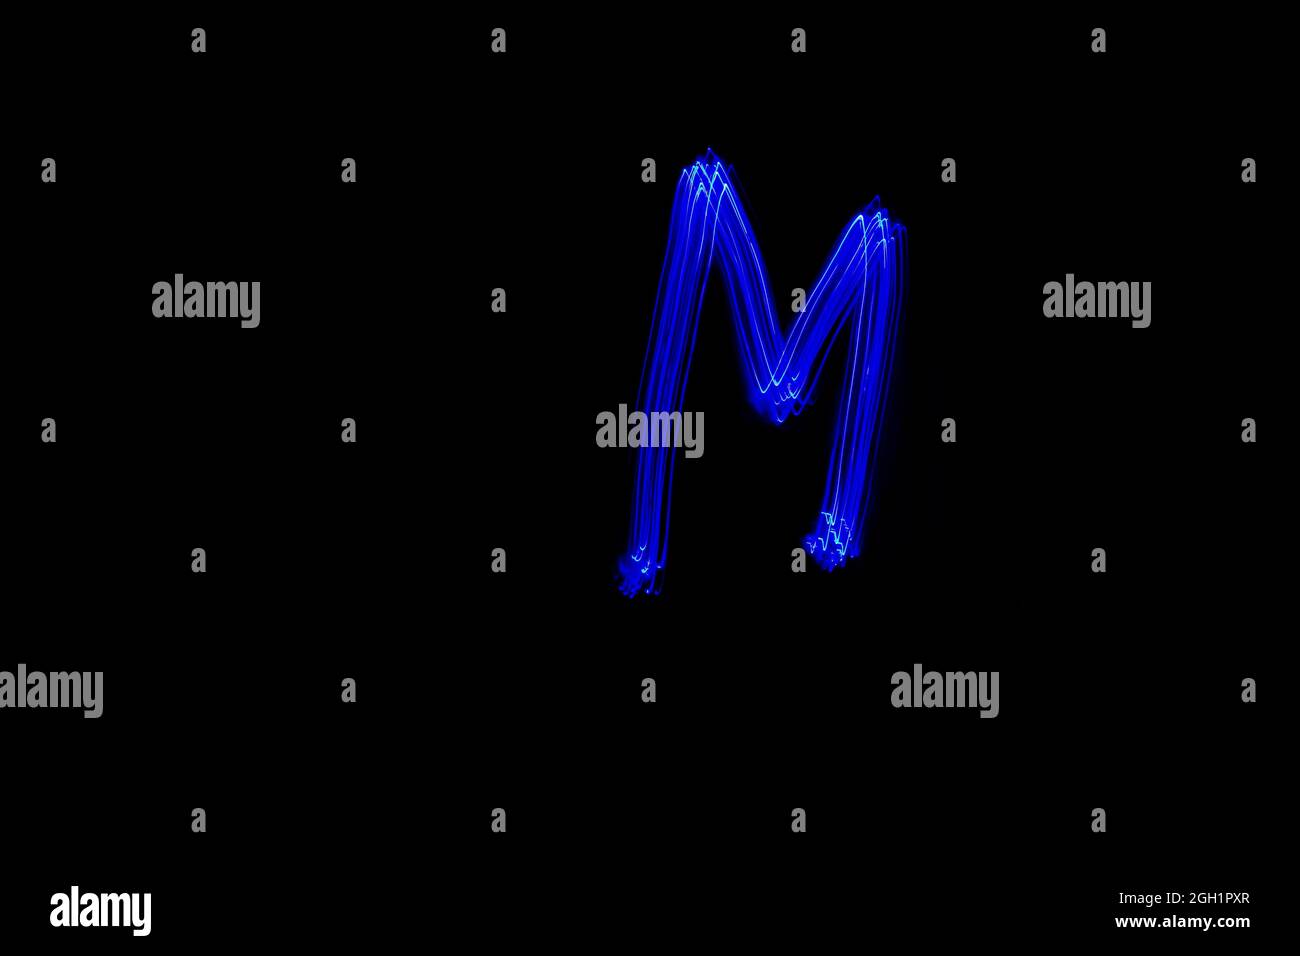 Letter M. Light painting alphabet. Long exposure photography. Drawn letter M with blue lights against black background. Stock Photo